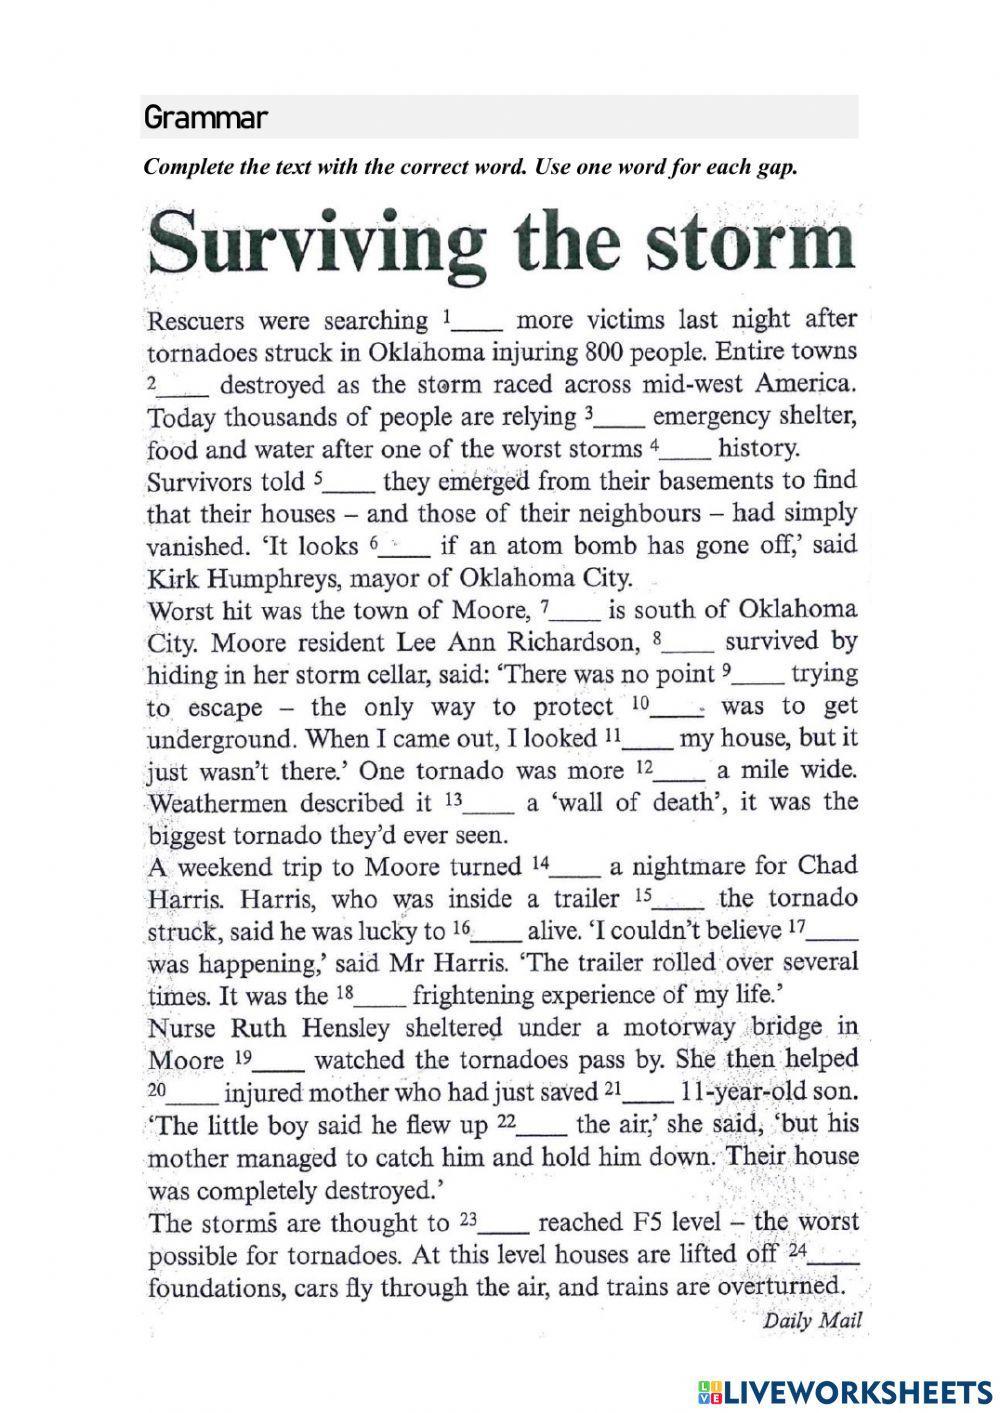 Surviving the Storm (from Daily Mail)